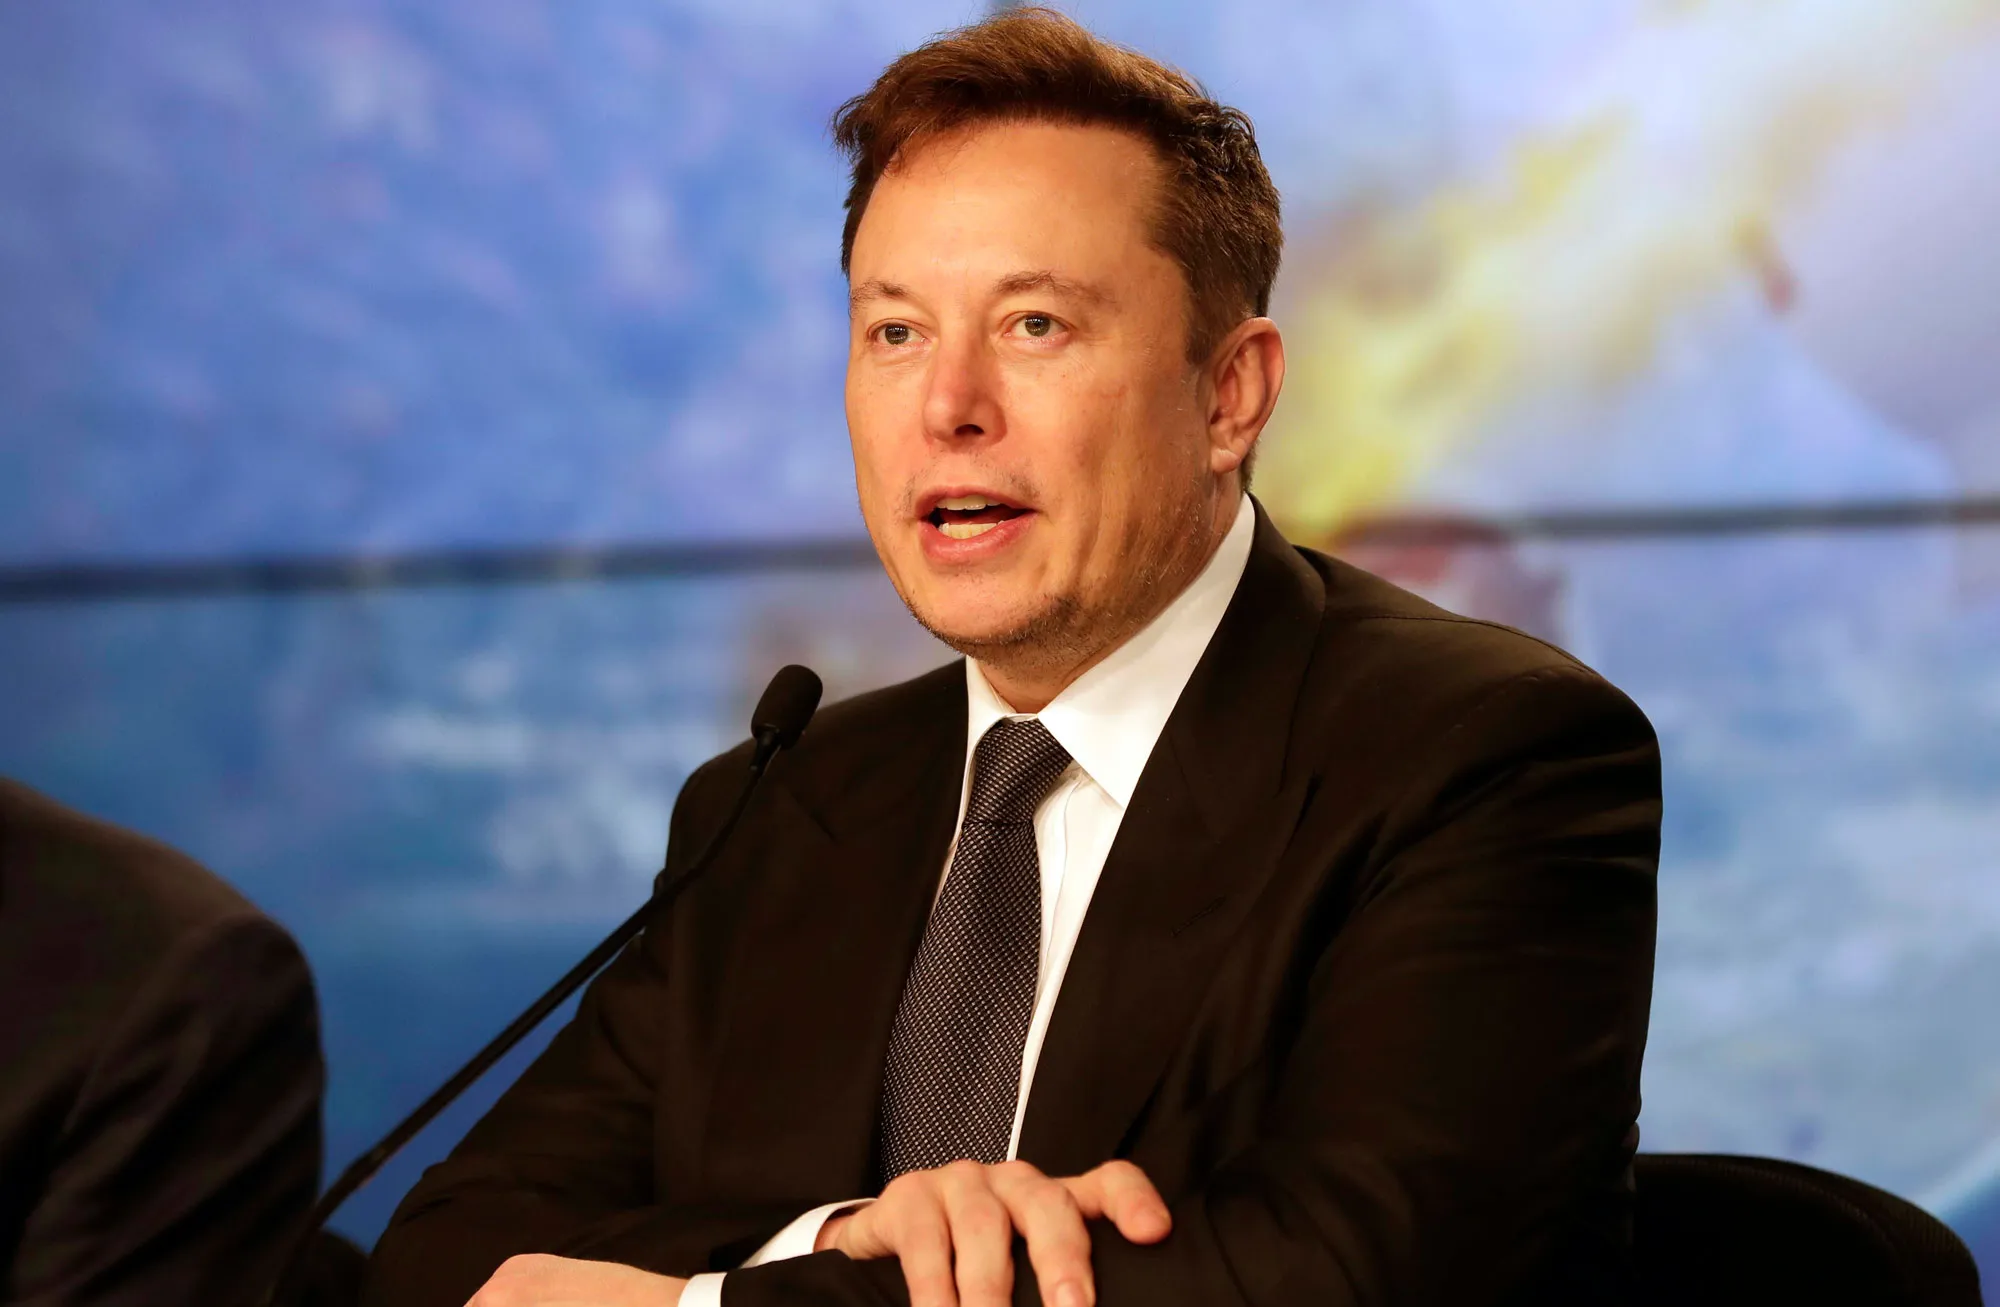 Elon Musk's Huge Tesla Deal Hits a Snag, Disappointment for Millions of Fans